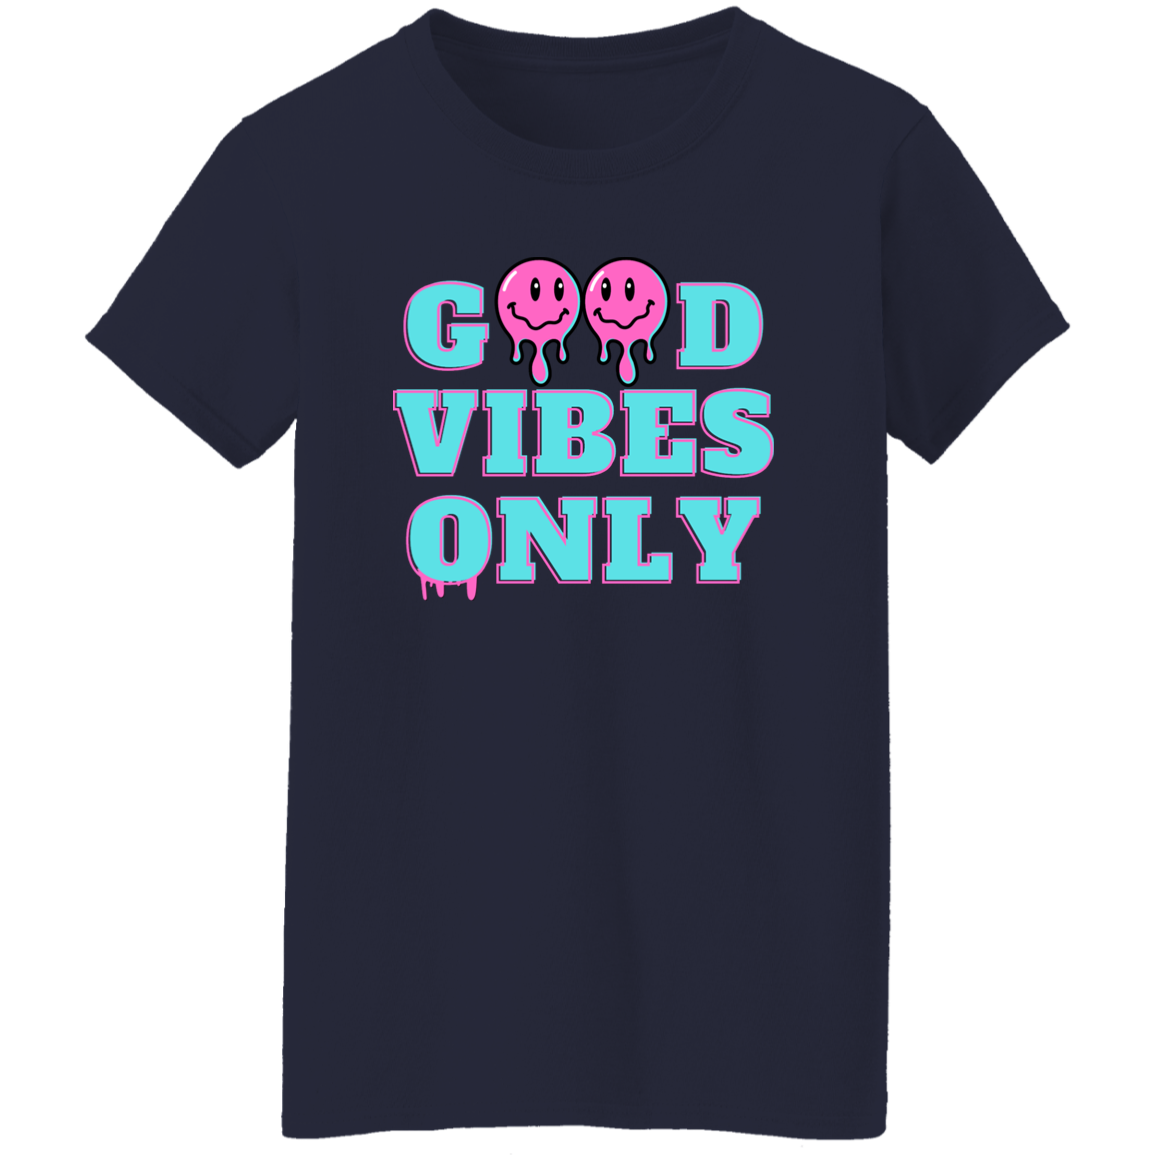 Good Vibes Only - Women's, Ladies' T-Shirt